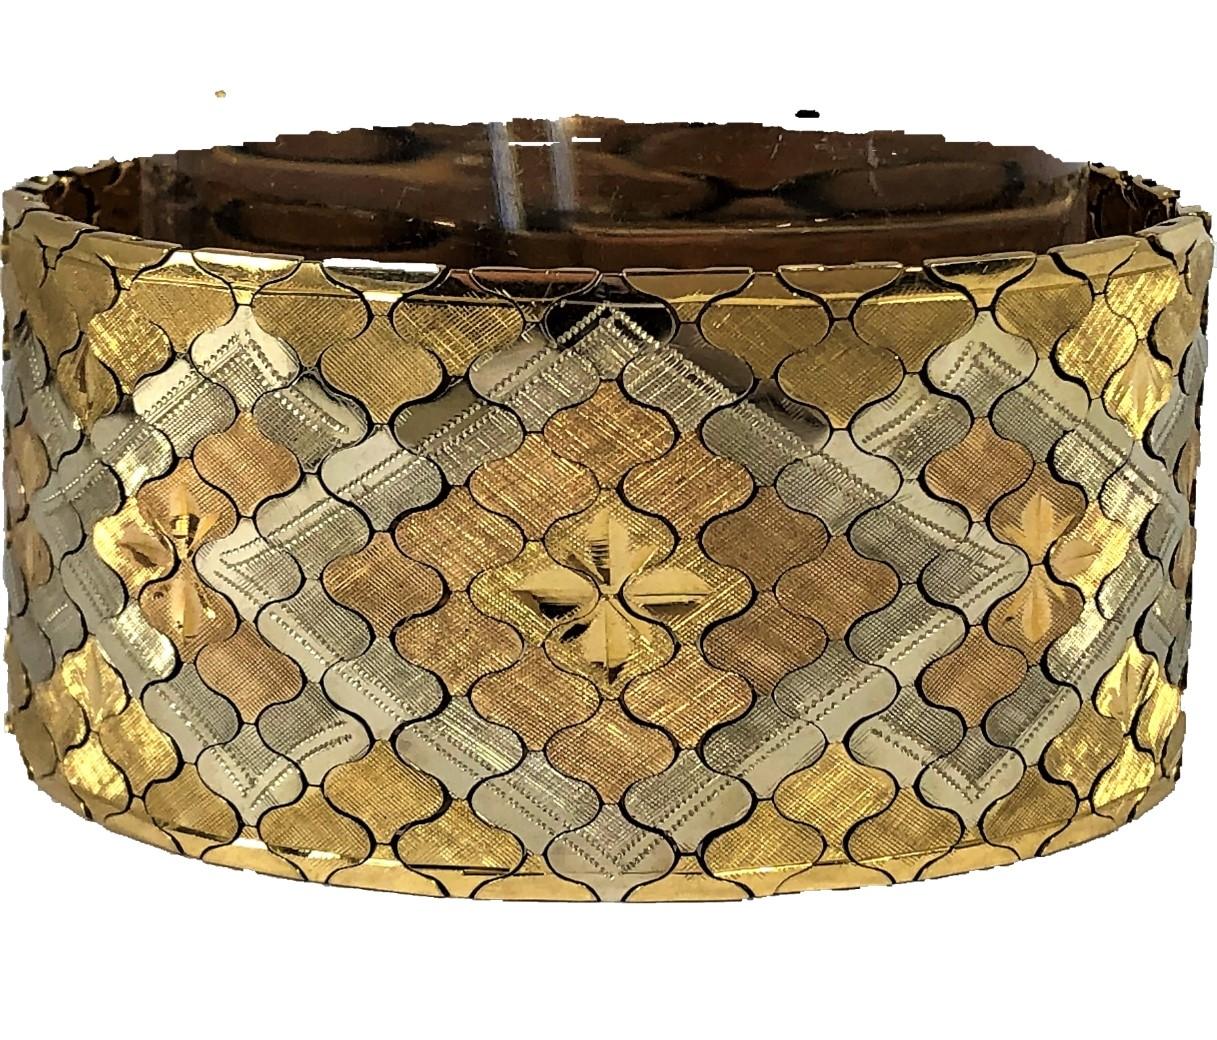 This classic Mid-20th Century, double Florentine, high polished and engraved bracelet measures 1 3/16 inches wide by 7 5/8 inches long. Weighing a hefty 86 grams, this smooth, flat, flexible bracelet feels very
smooth and comfortable to the touch.